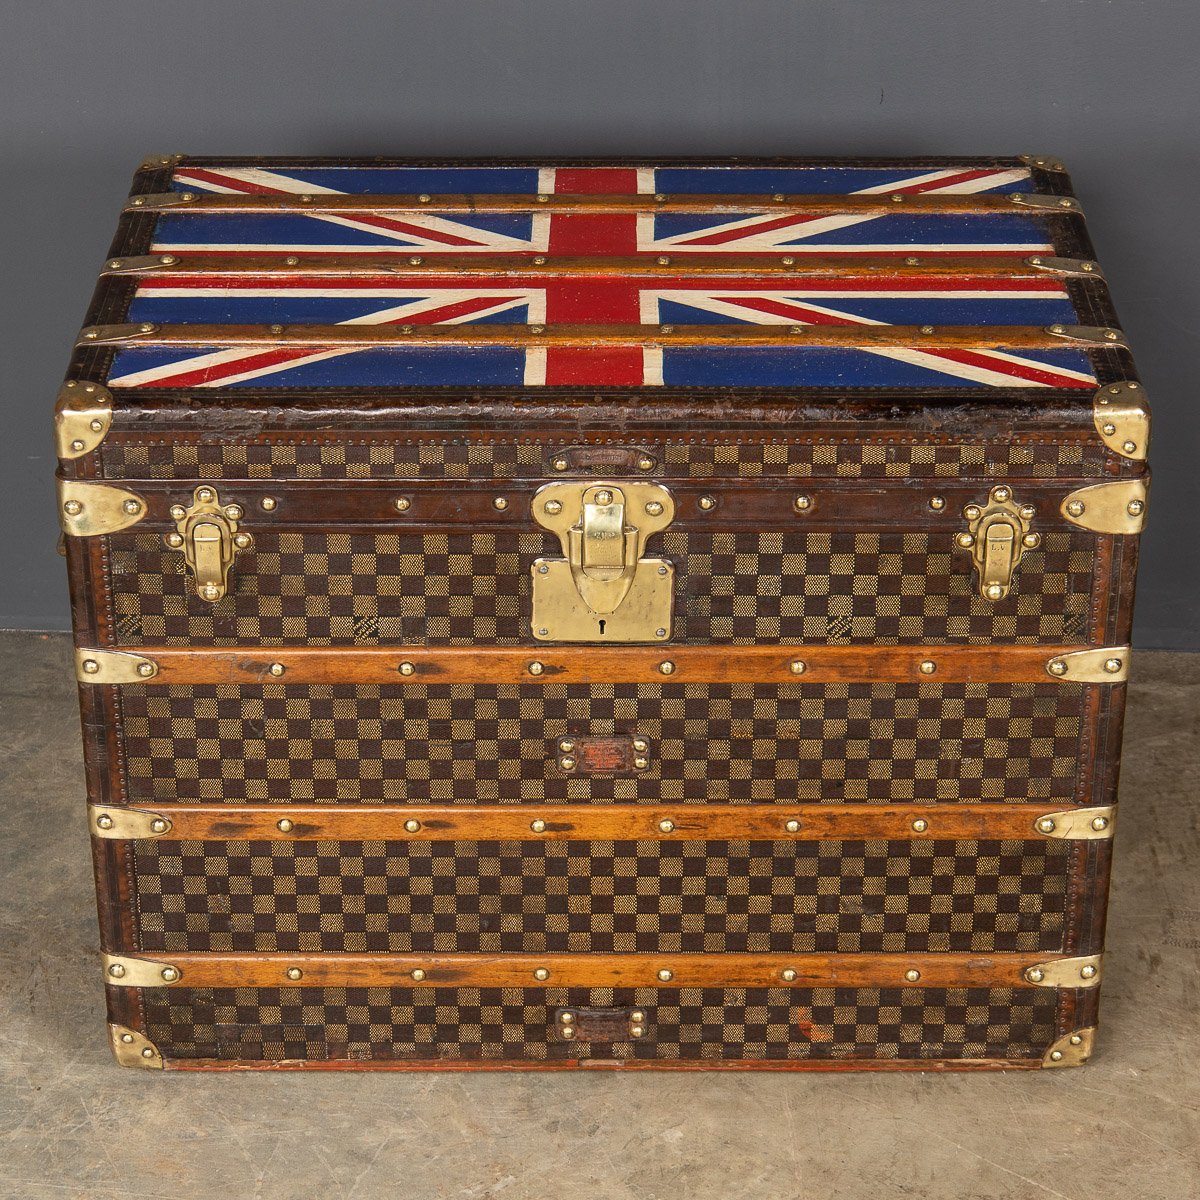 The Louis Vuitton Trunks That Take 150 Hours to Make  WSJ